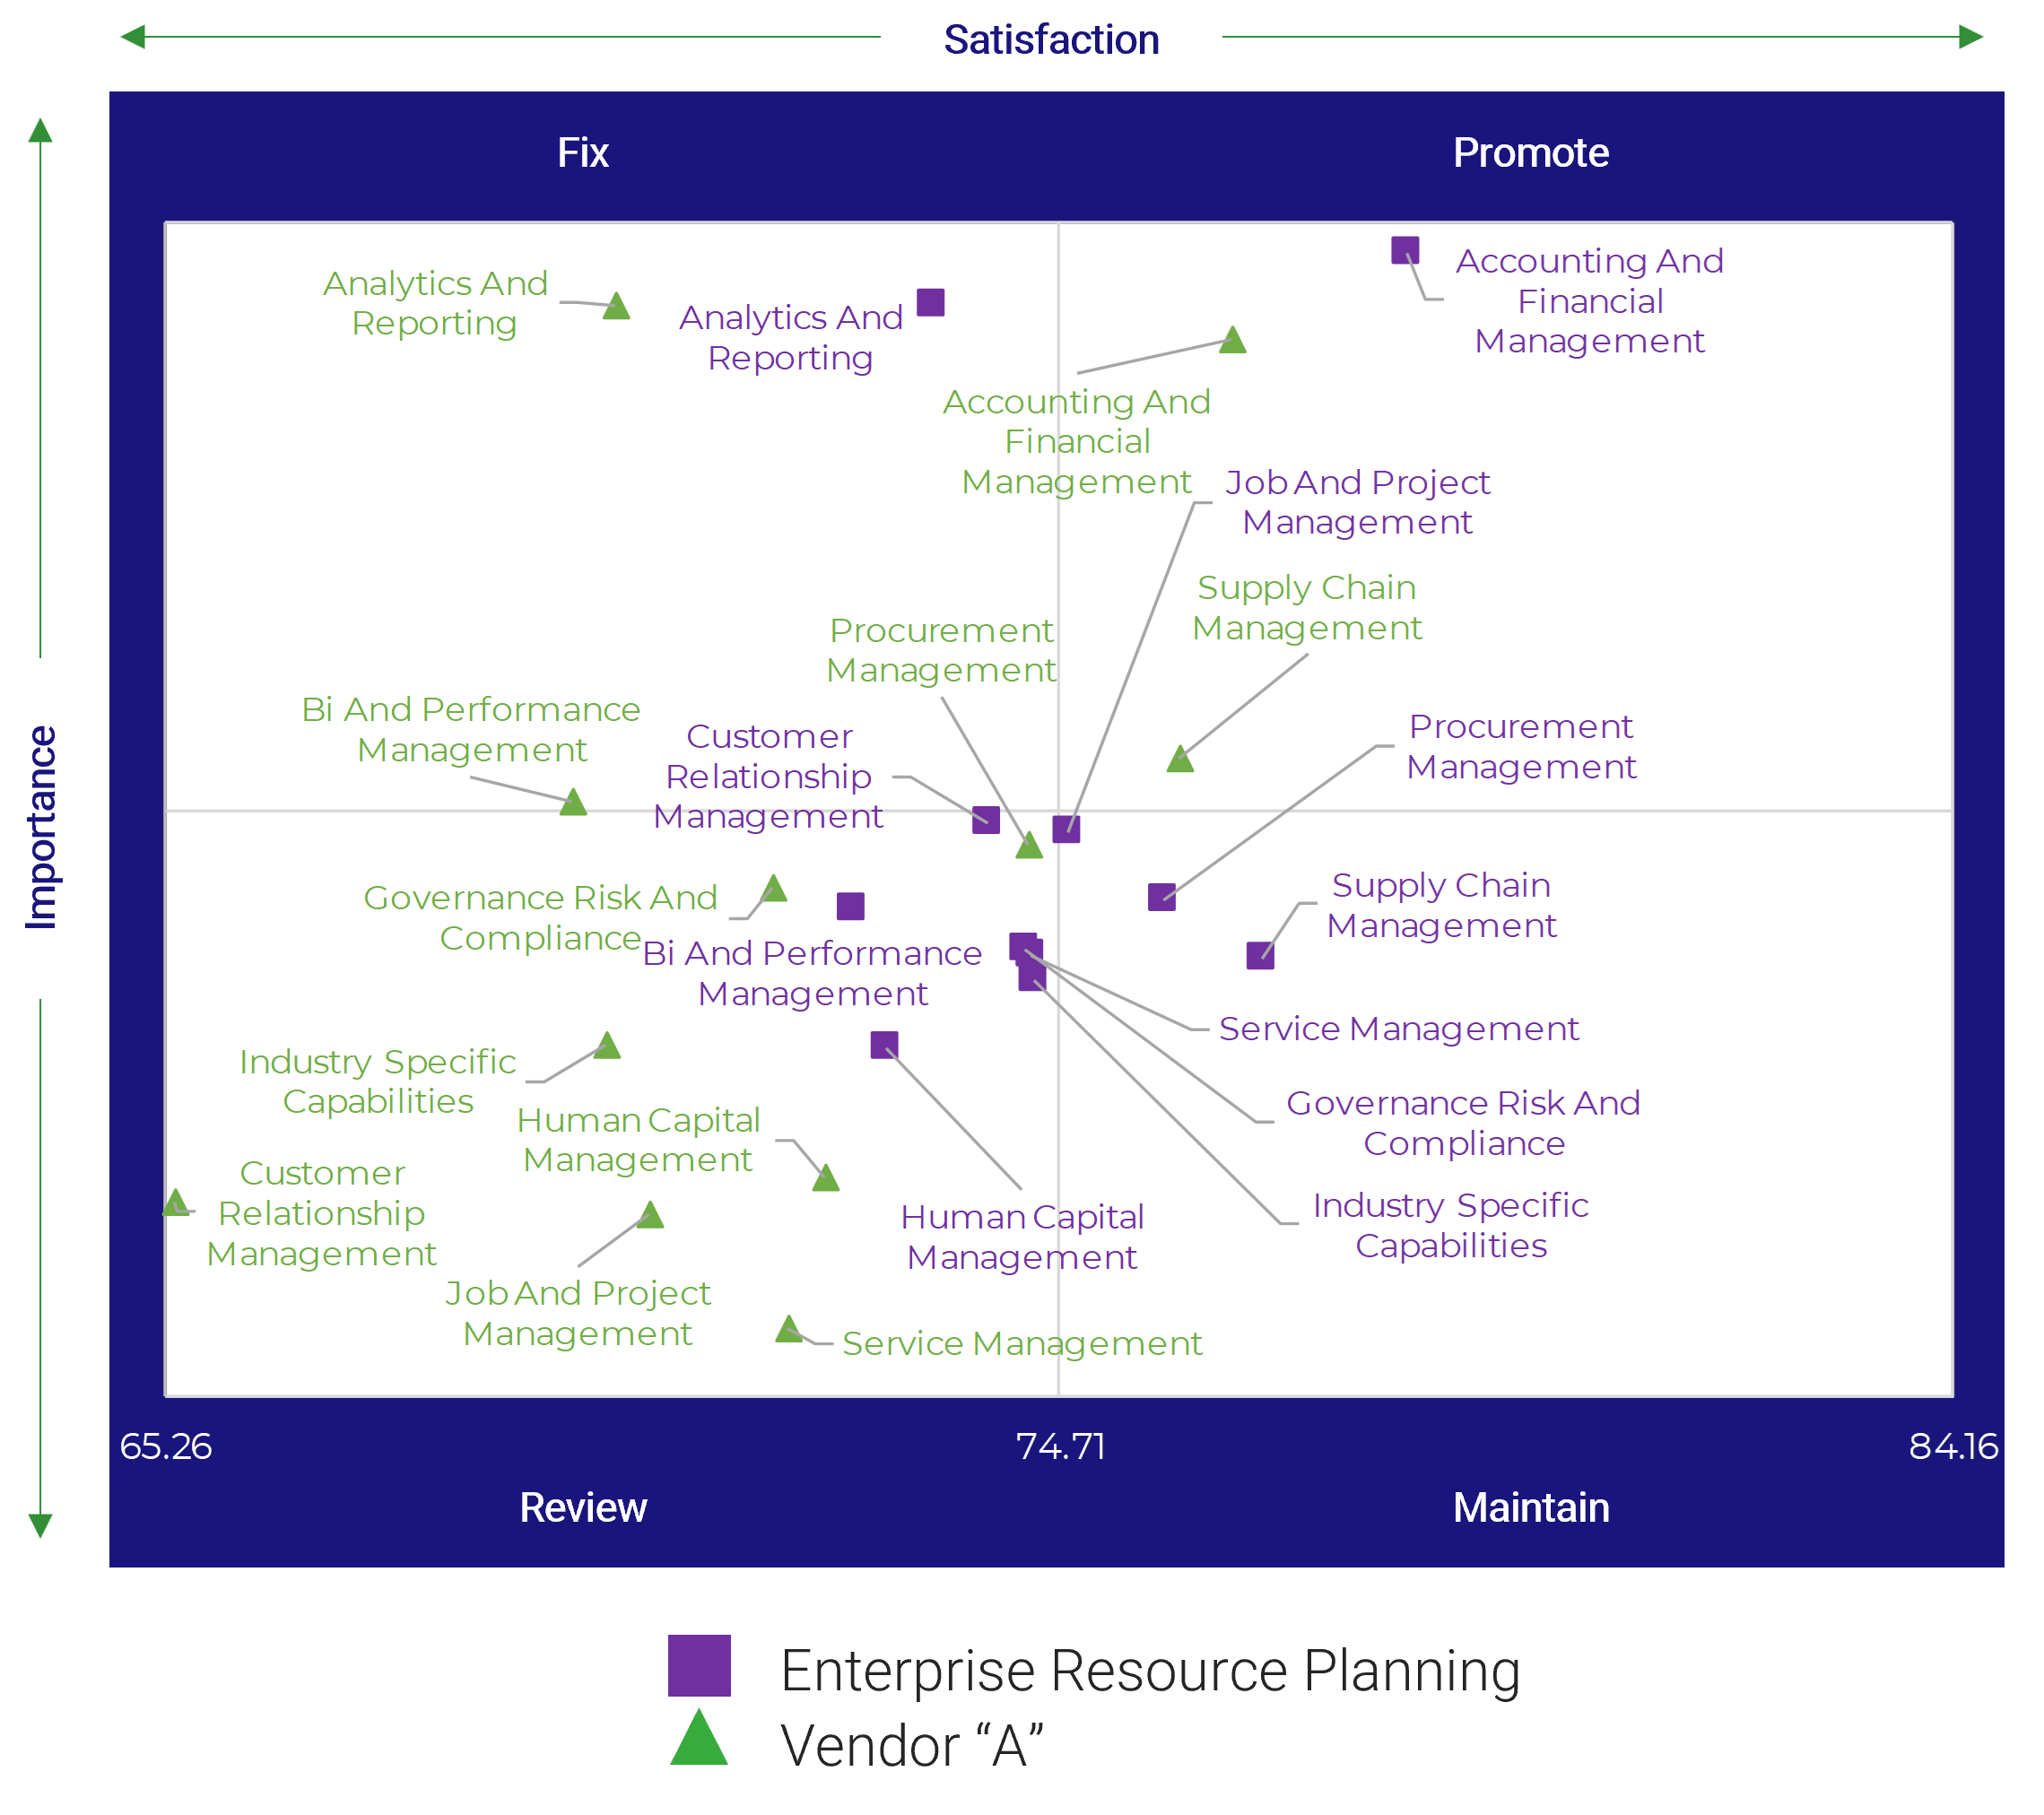 Importance vs. Satisfaction map for Features, as shown on the previous slide, but with examples mapped onto it using a legend, purple squares are 'Enterprise Resource Planning' and green triangles are 'Vendor A'.